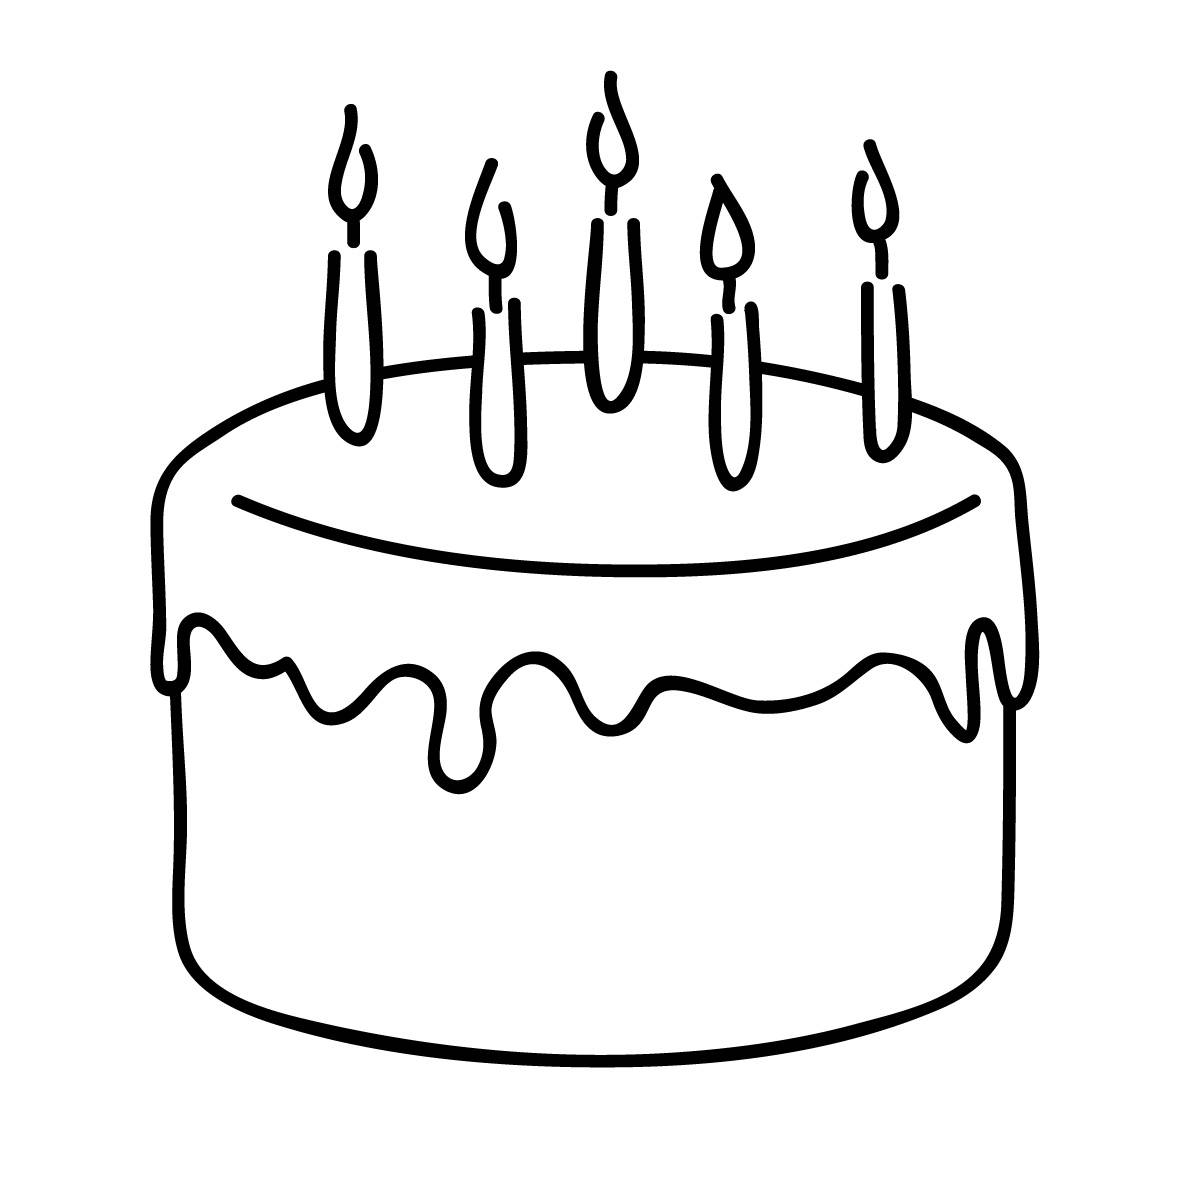 Birthday cake clipart free clipart images clipartix